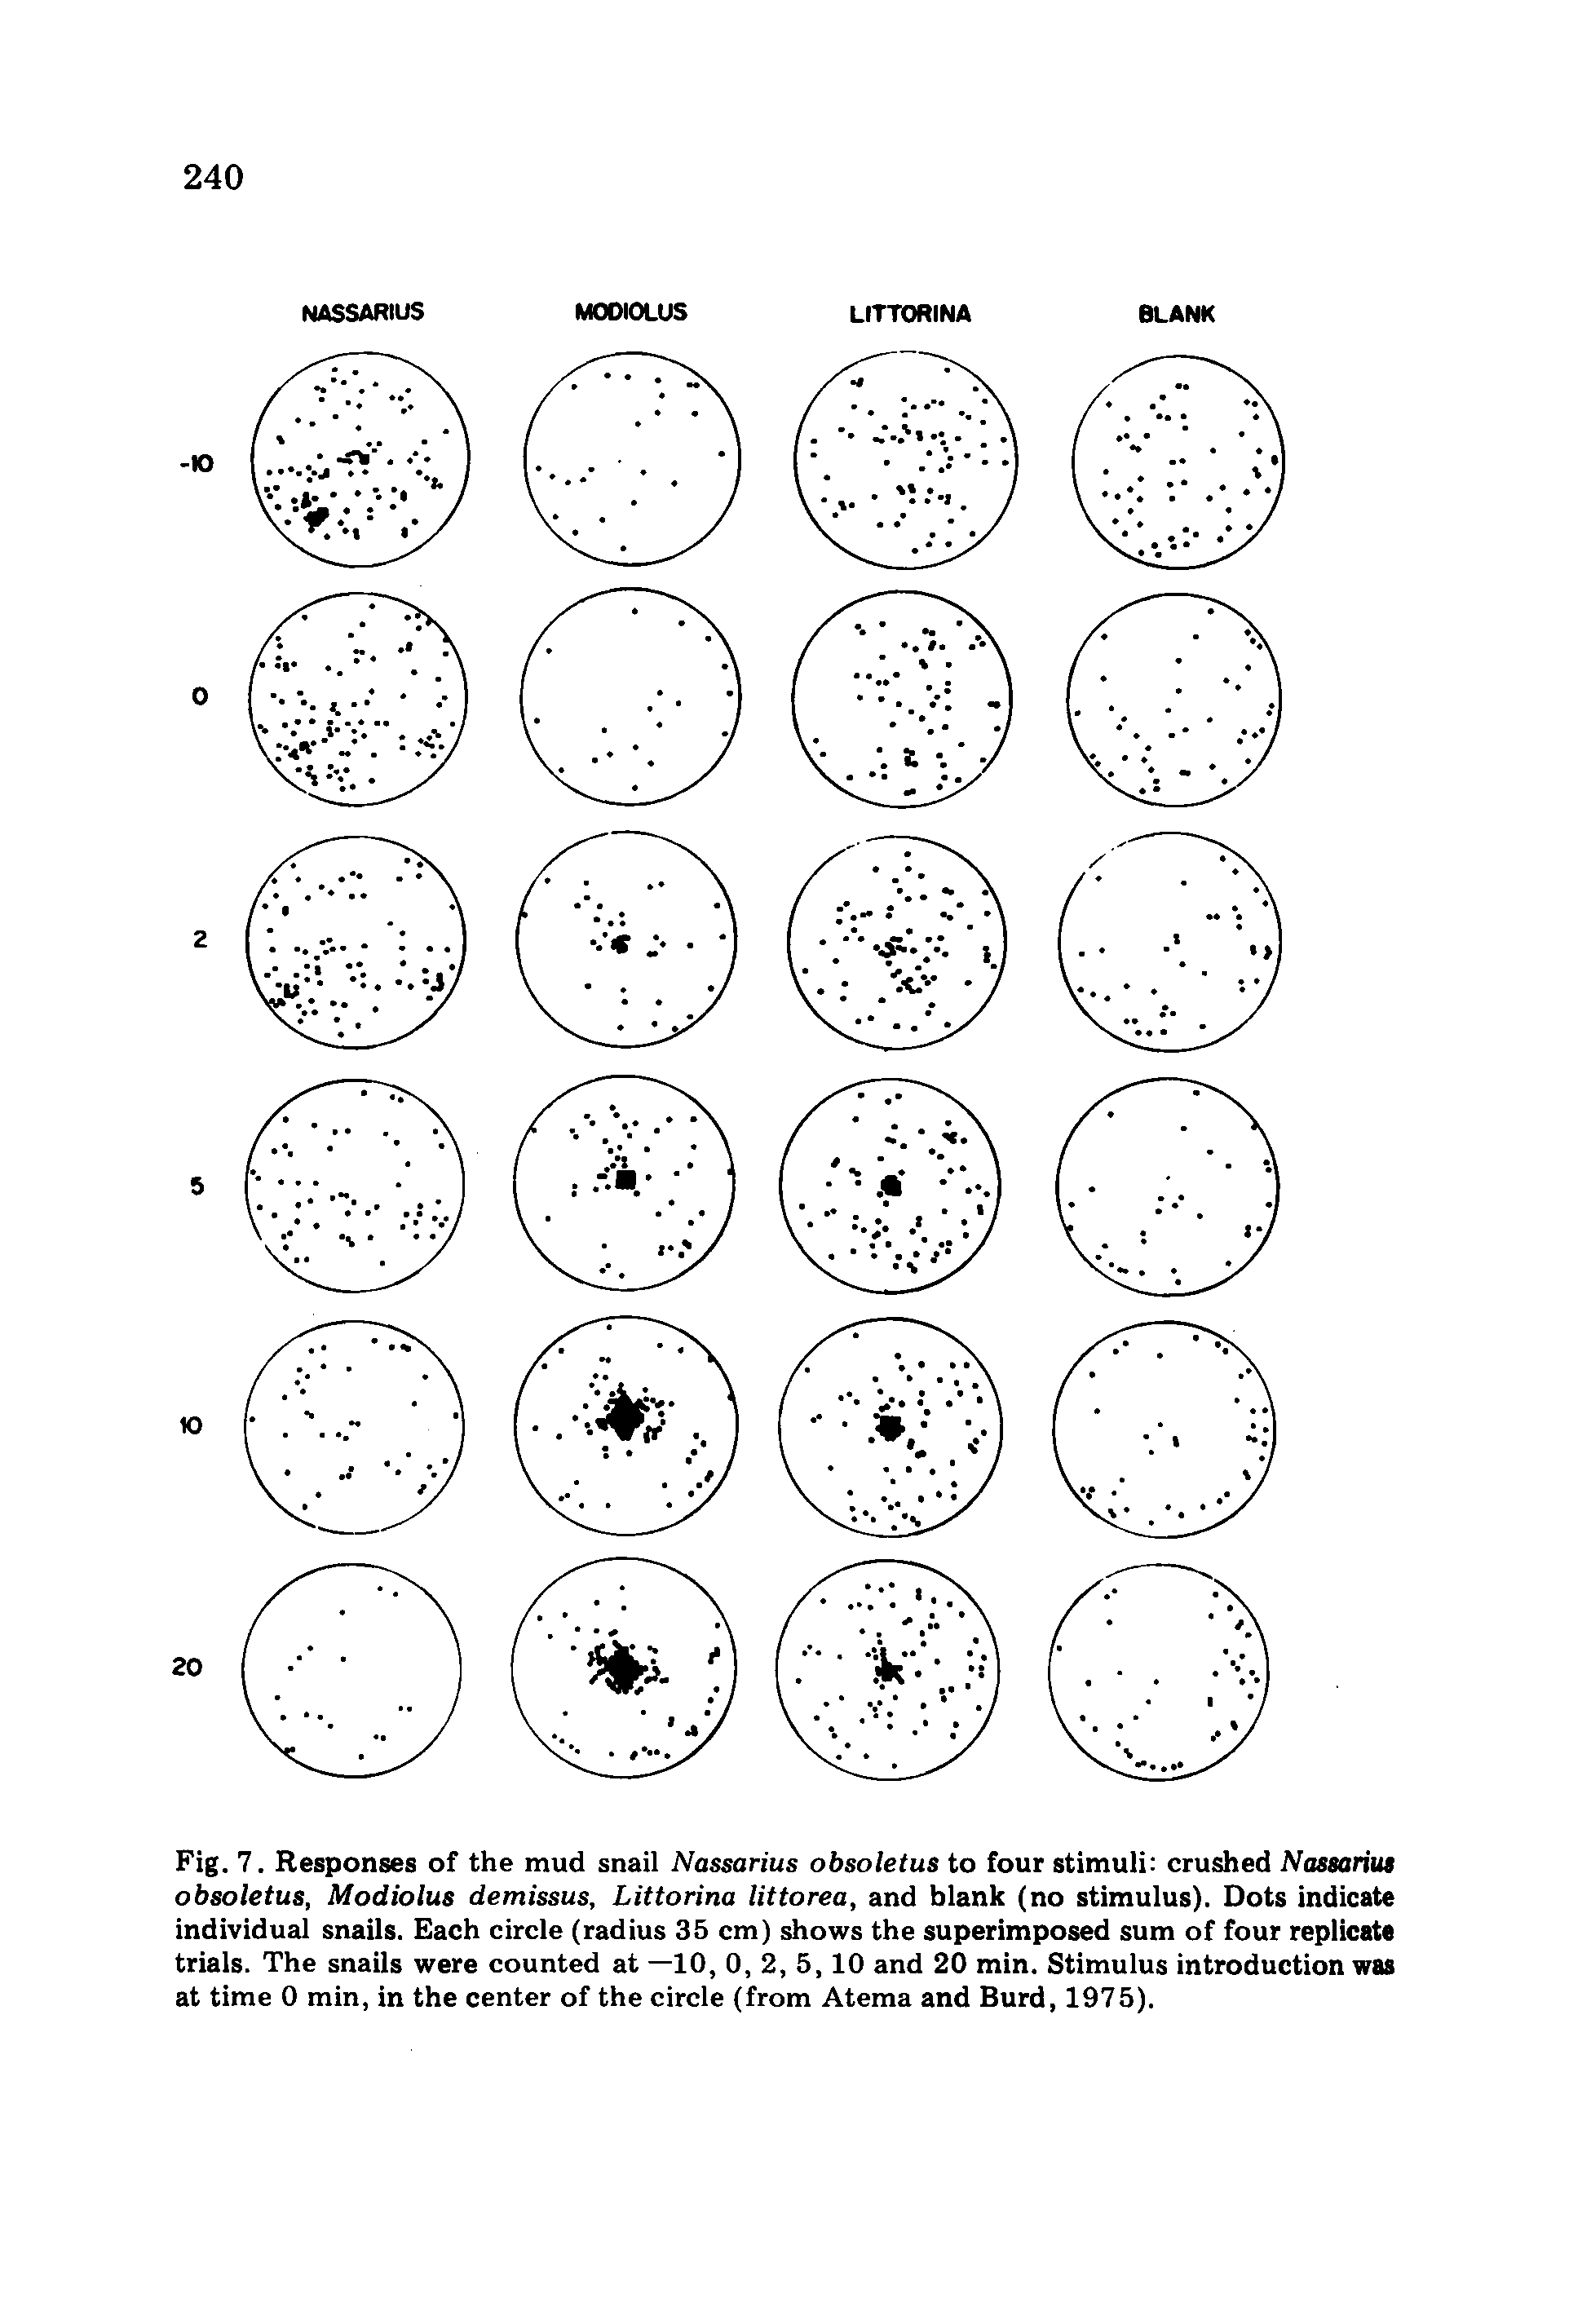 Fig. 7. Responses of the mud snail Nassarius obsoletus to four stimuli crushed Nassarius obsoletus, Modiolus demissus, Littorina littorea, and blank (no stimulus). Dots indicate individual snails. Each circle (radius 35 cm) shows the superimposed sum of four replicate trials. The snails were counted at —10, 0, 2, 5,10 and 20 min. Stimulus introduction was at time 0 min, in the center of the circle (from Atema and Burd, 1975).